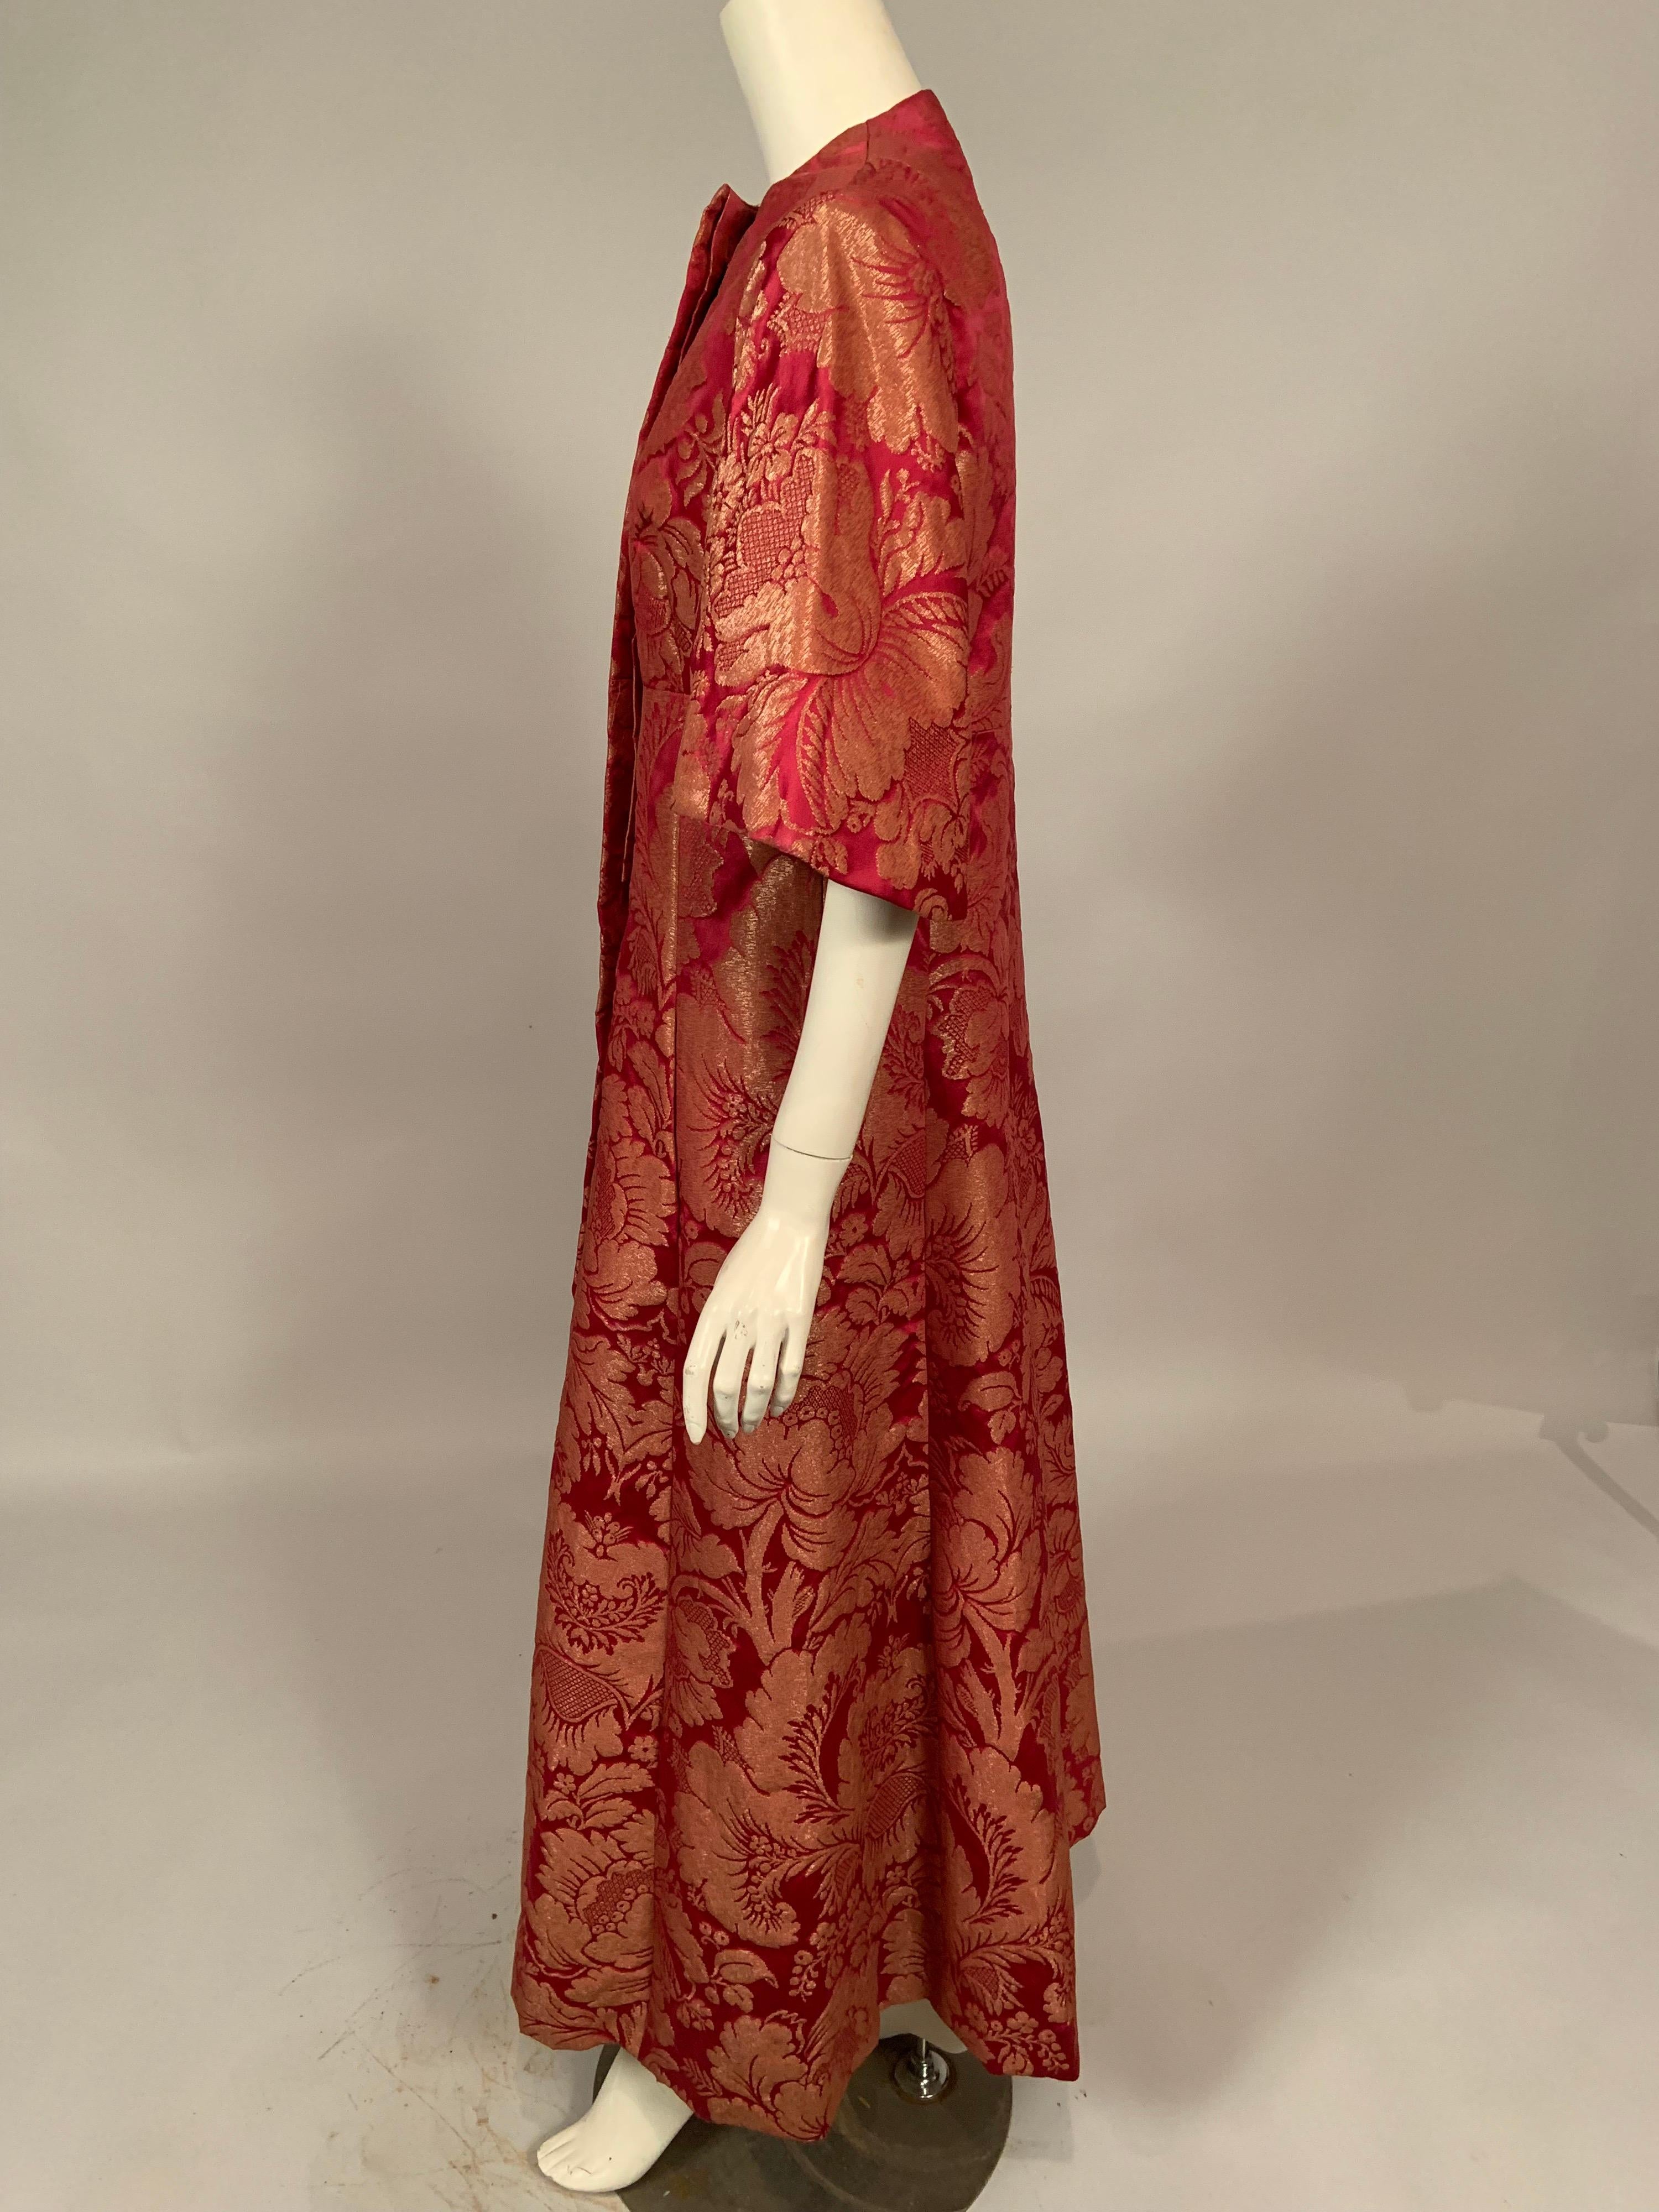 1960's Helena Barbieri Raspberry Red and Woven Metallic Gold Dress and Coat For Sale 6